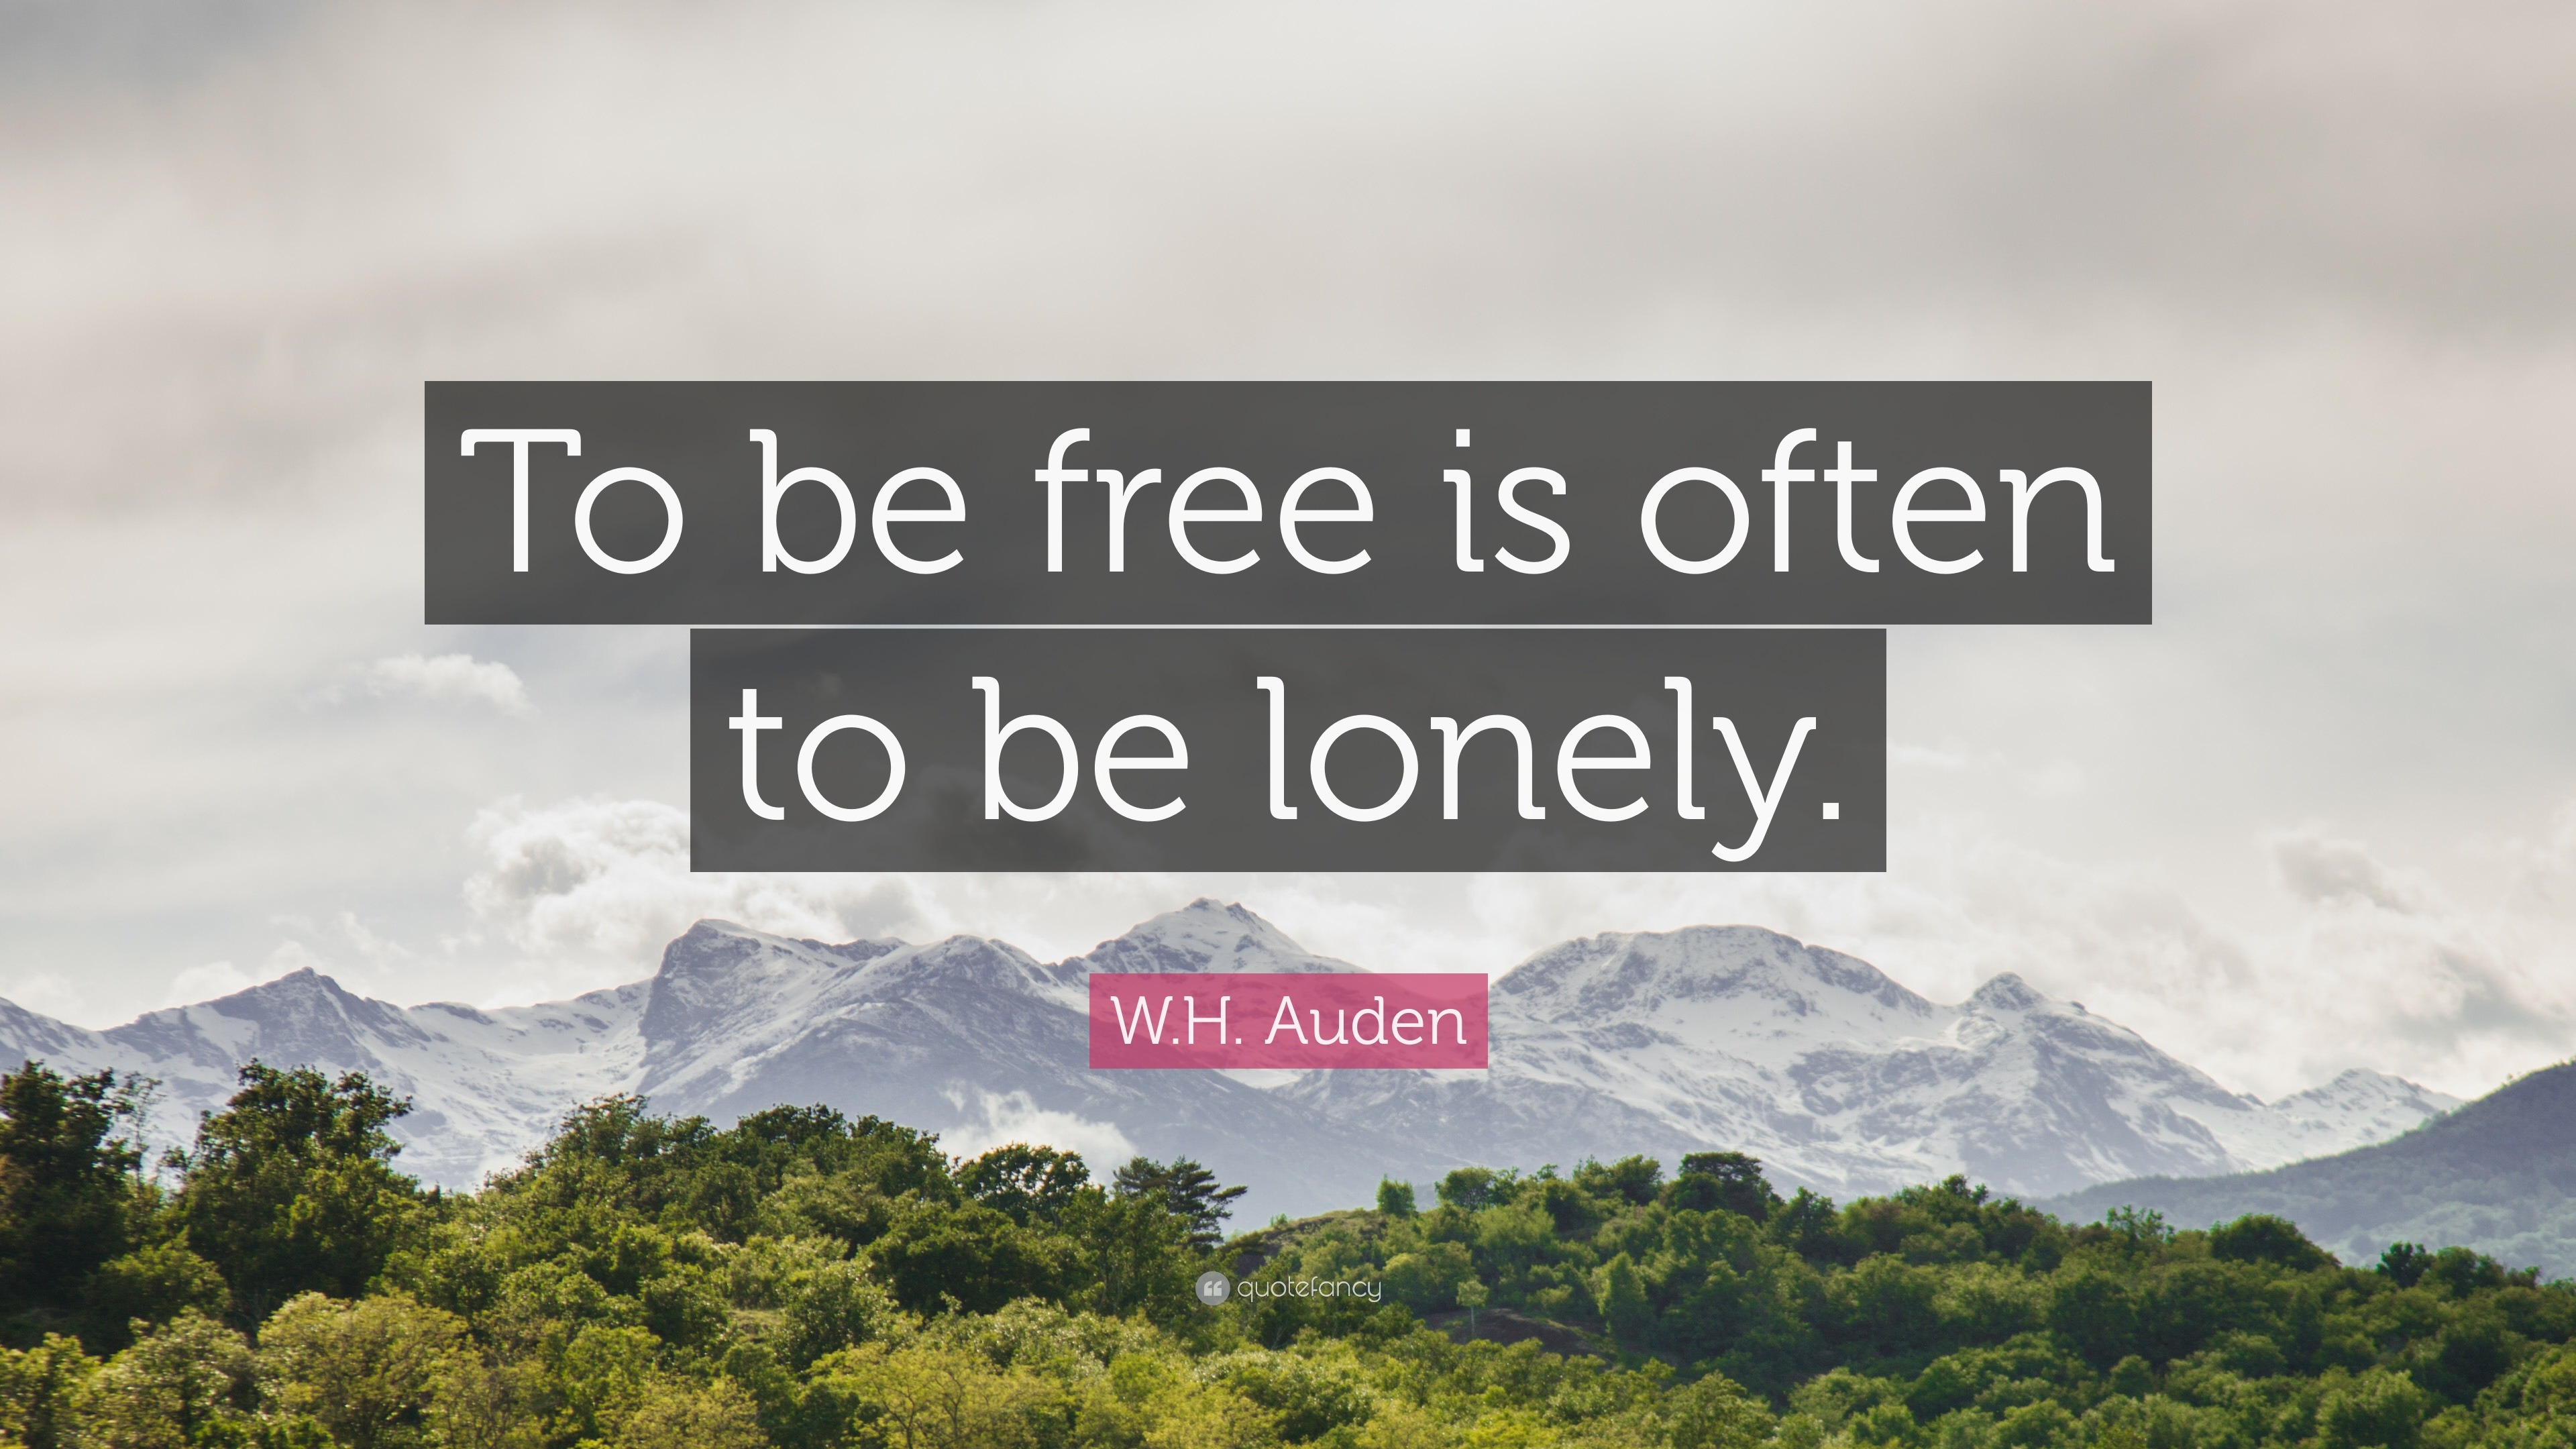 Why Be Lonely?